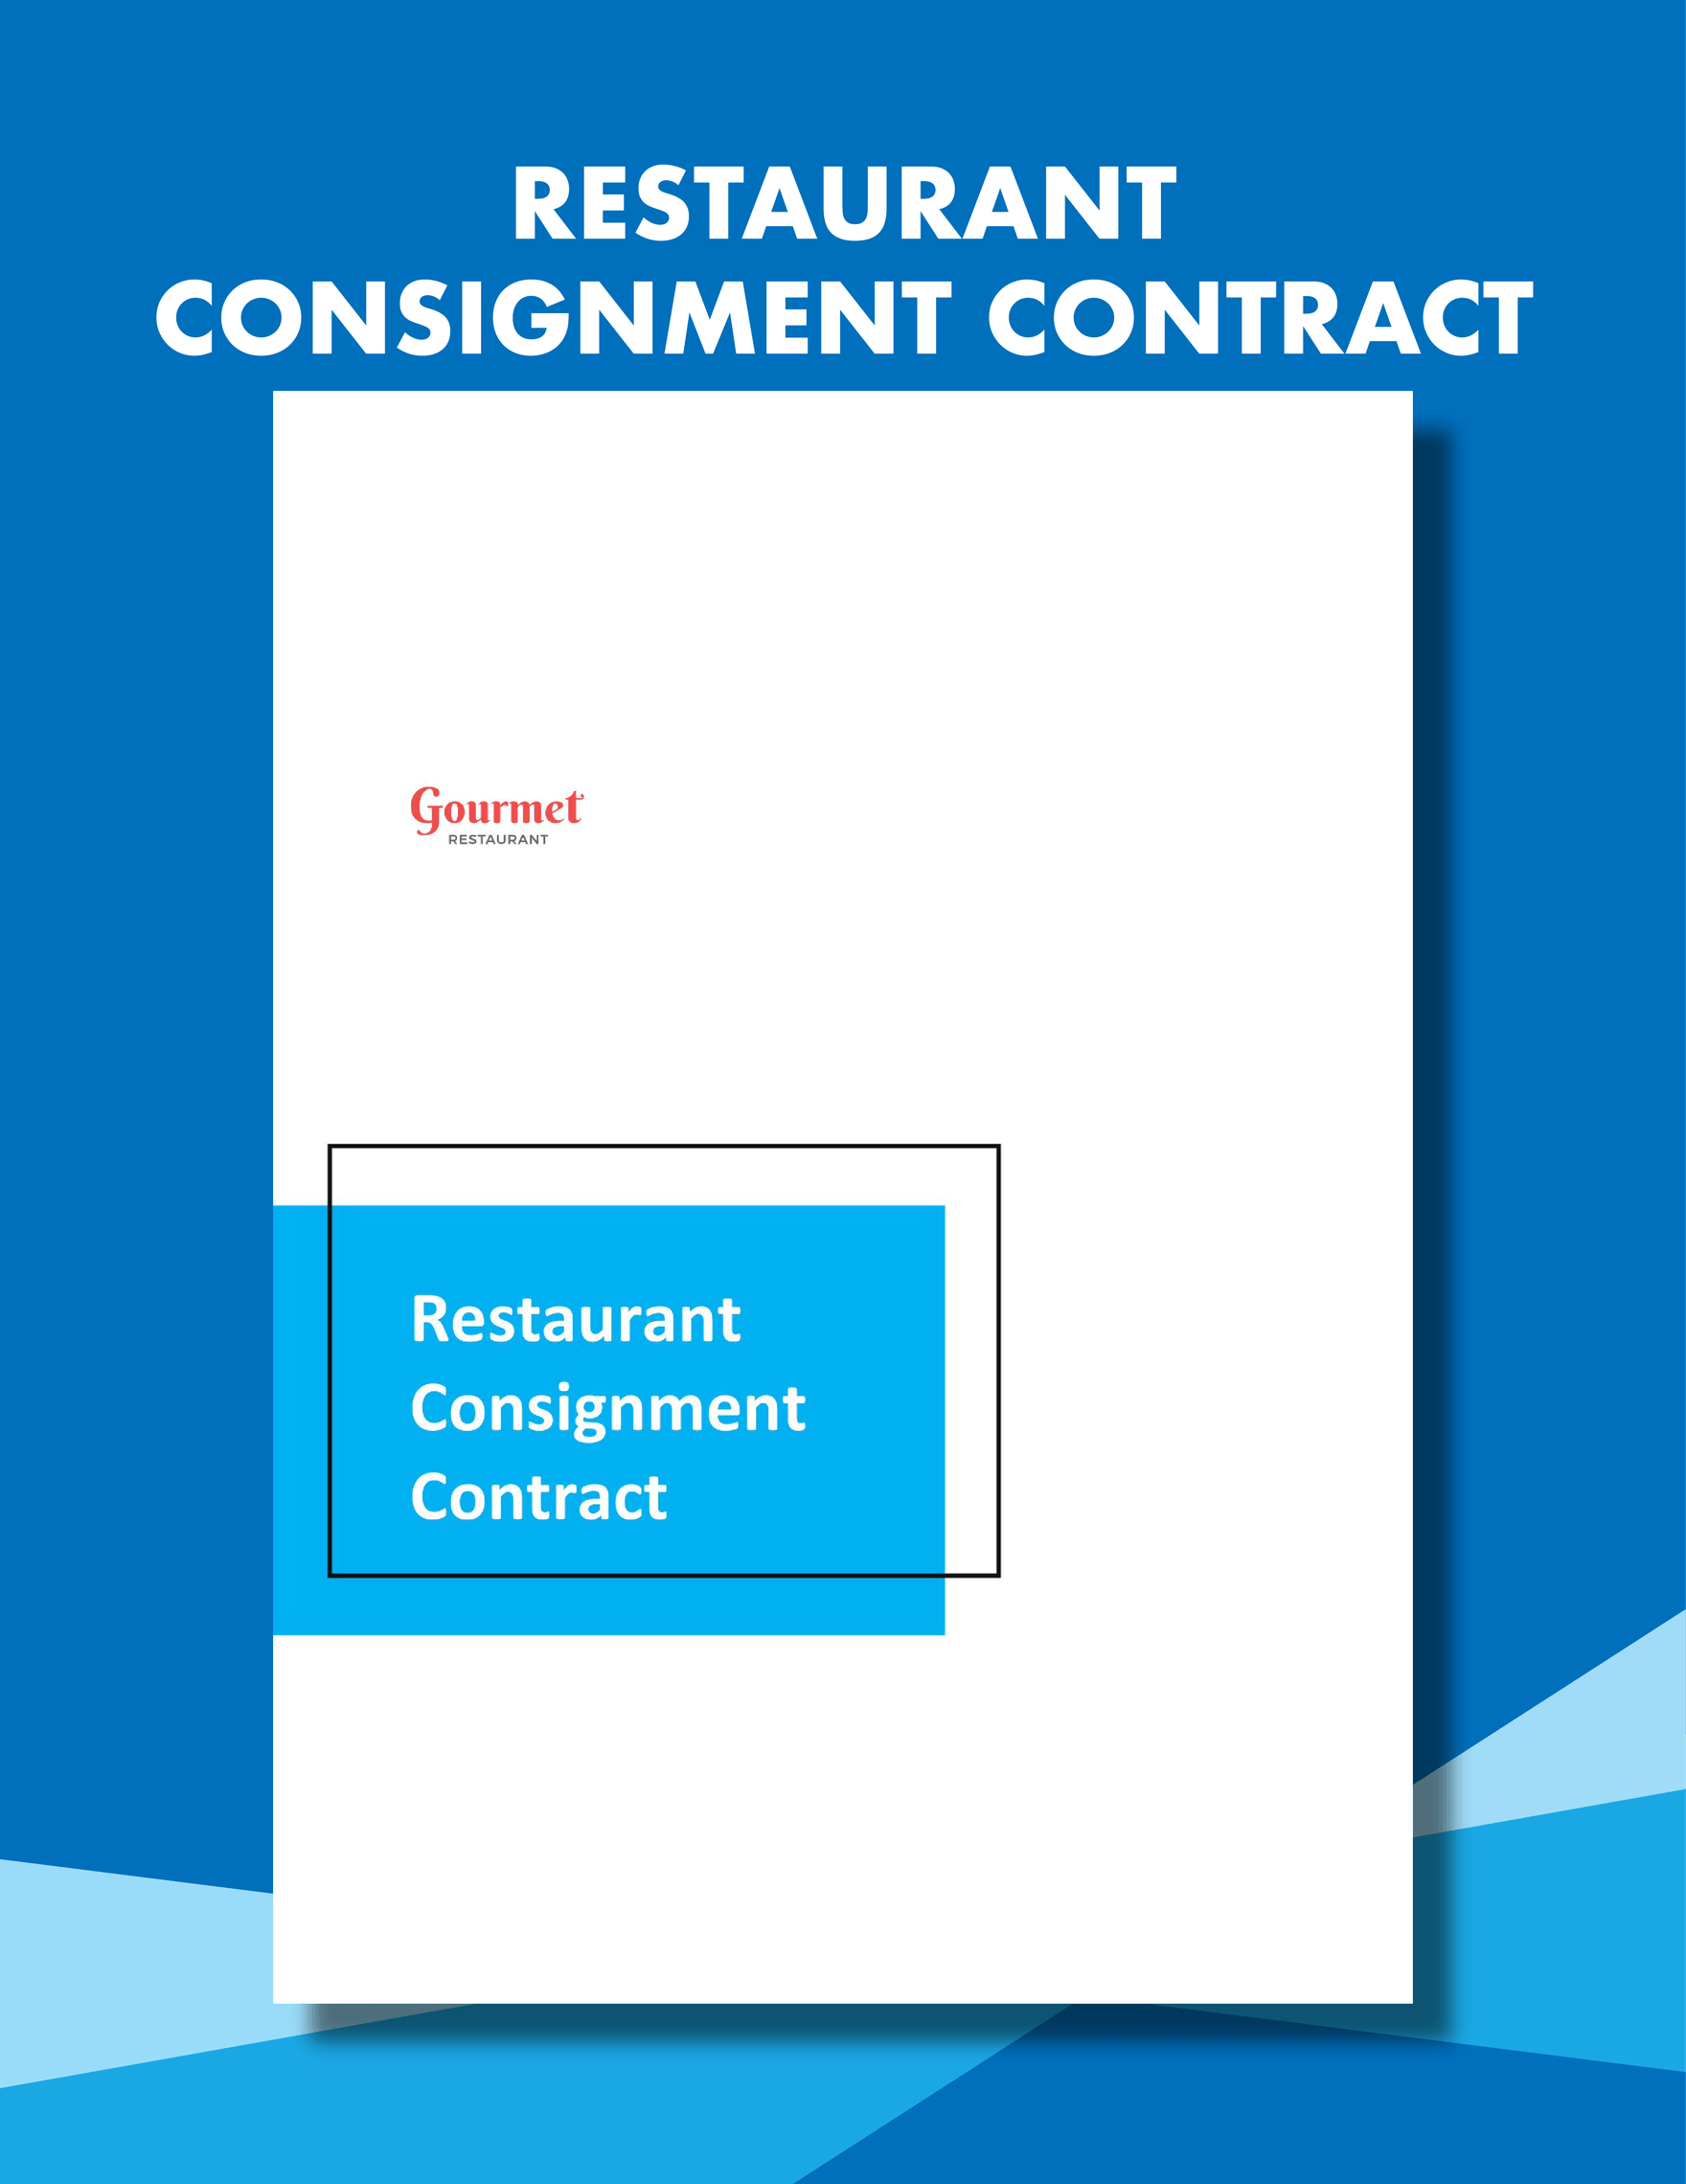 Restaurant Consignment Contract Template in Word, Google Docs, Apple Pages